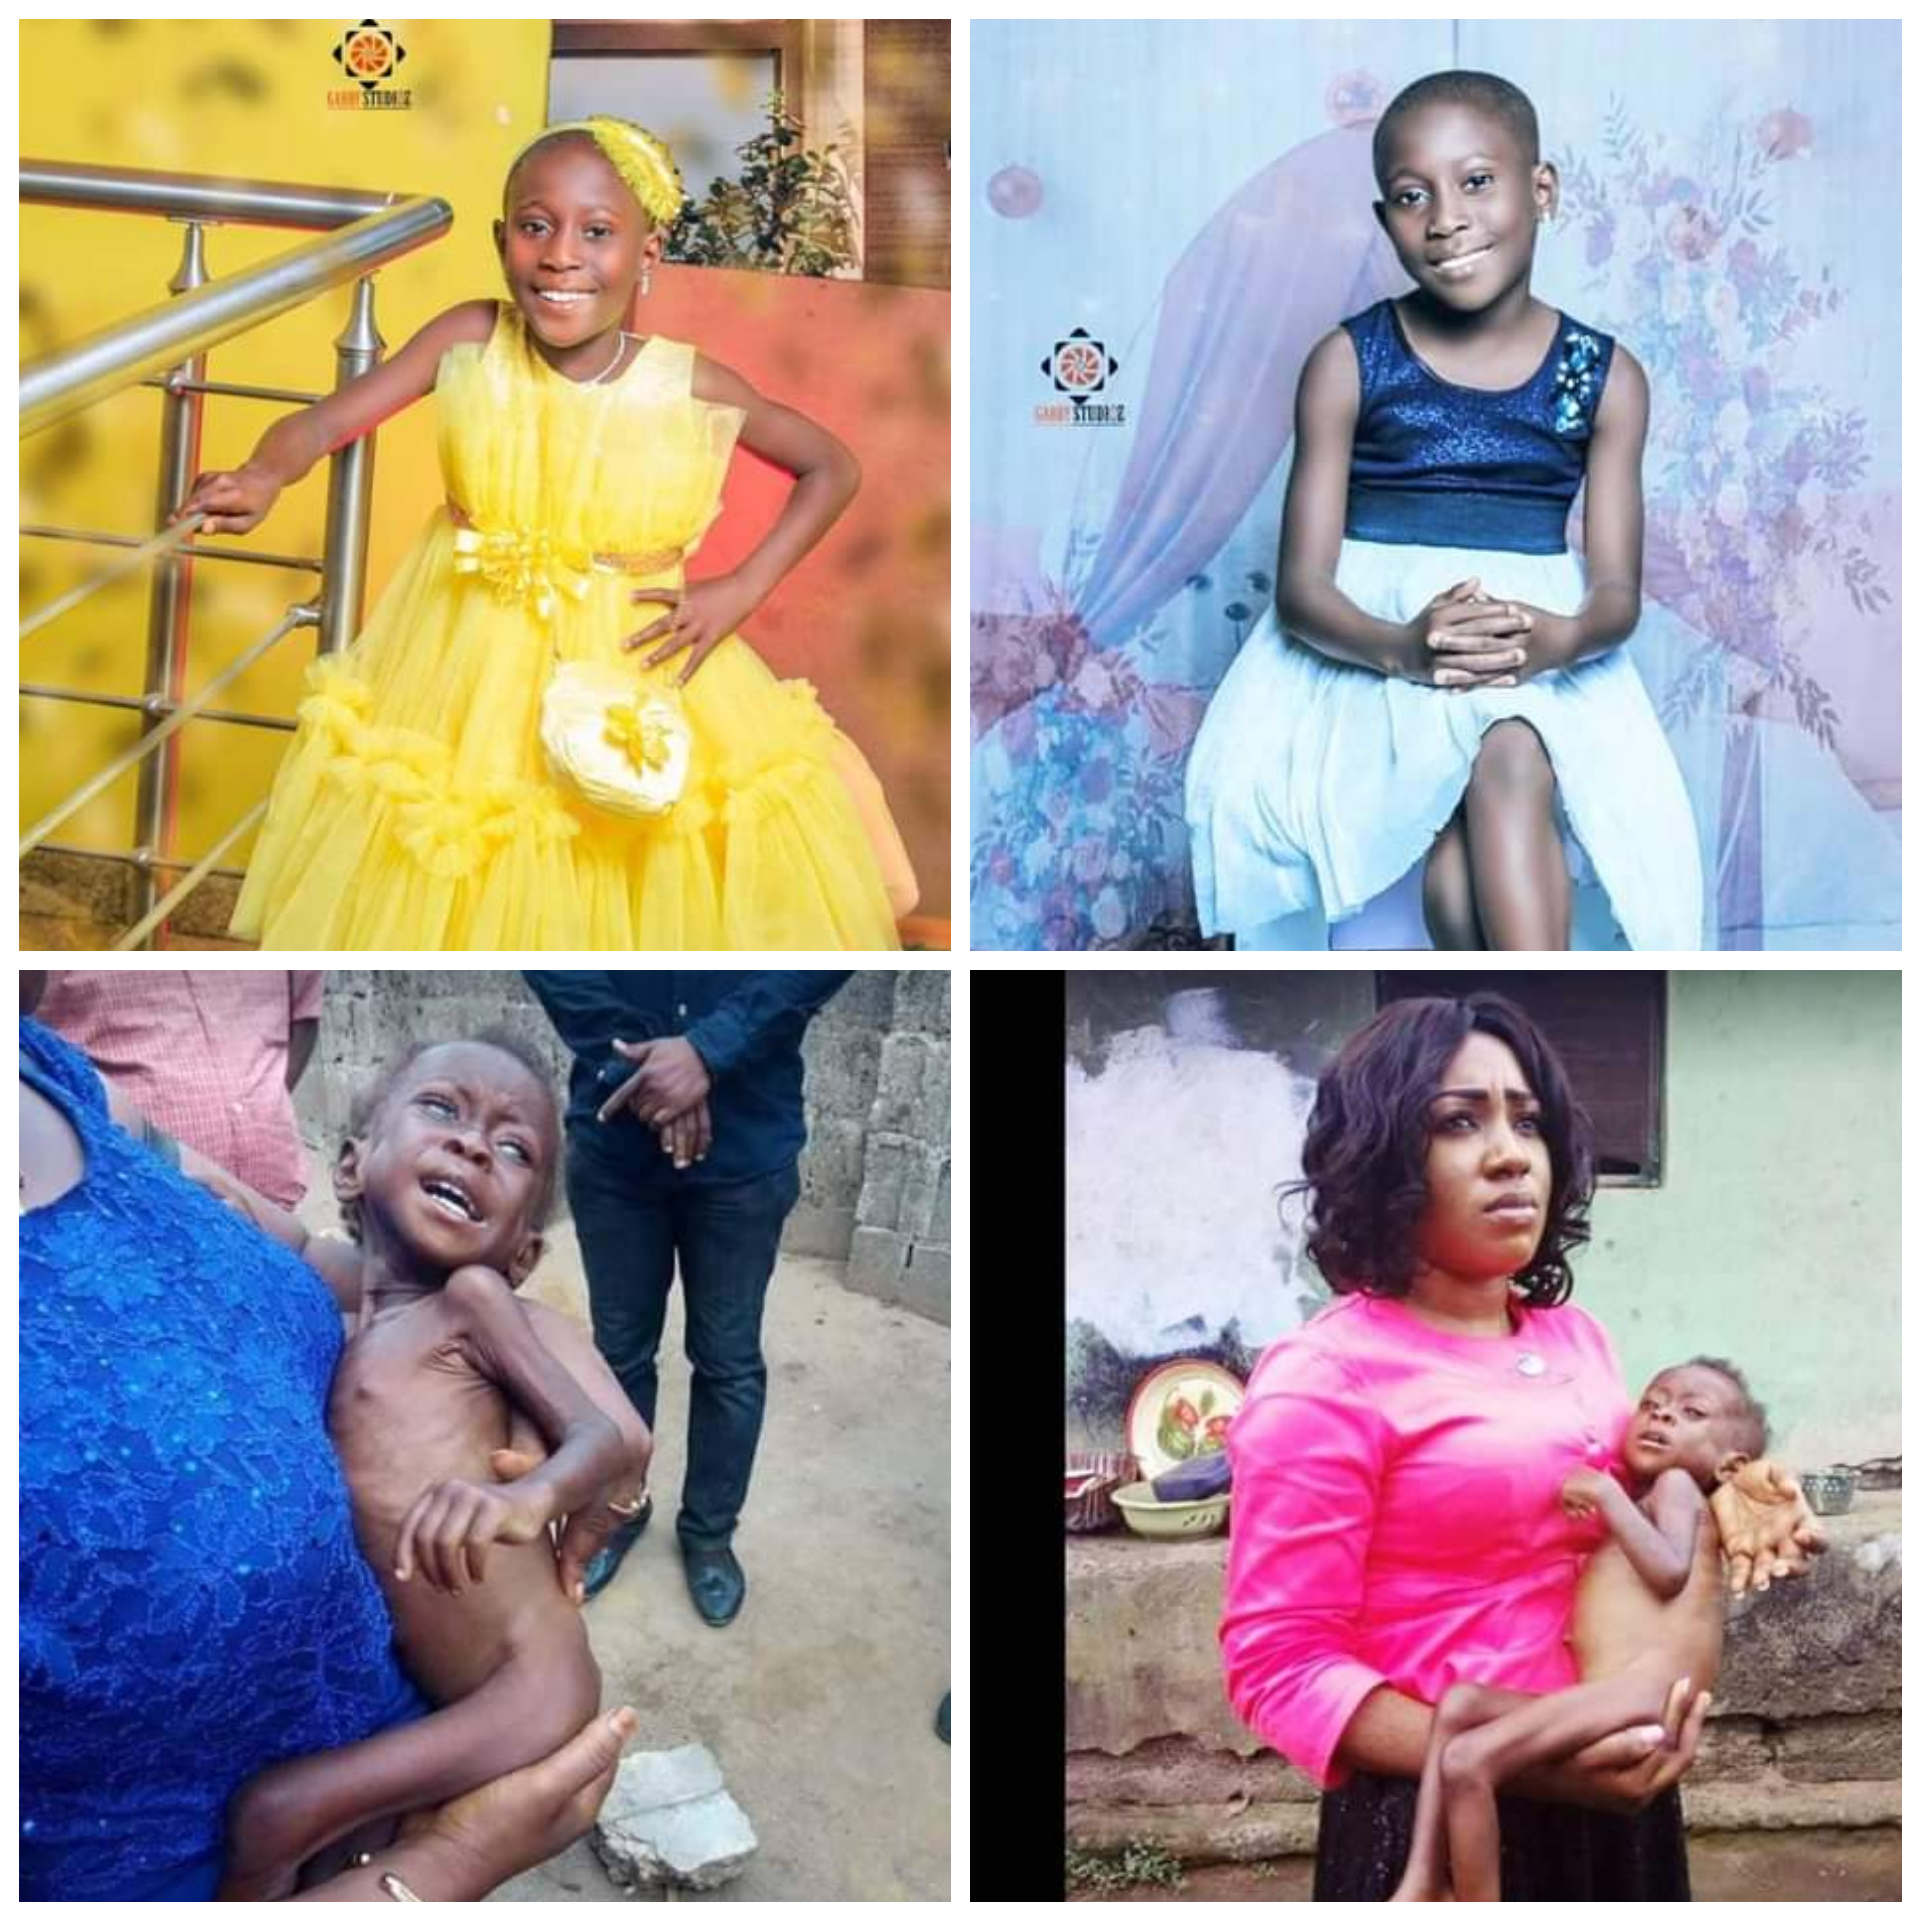 SEE NEW PHOTOS OF SEVERELY MALNOURISHED GIRL RESCUED IN CROSS RIVER 6 YEARS AGO